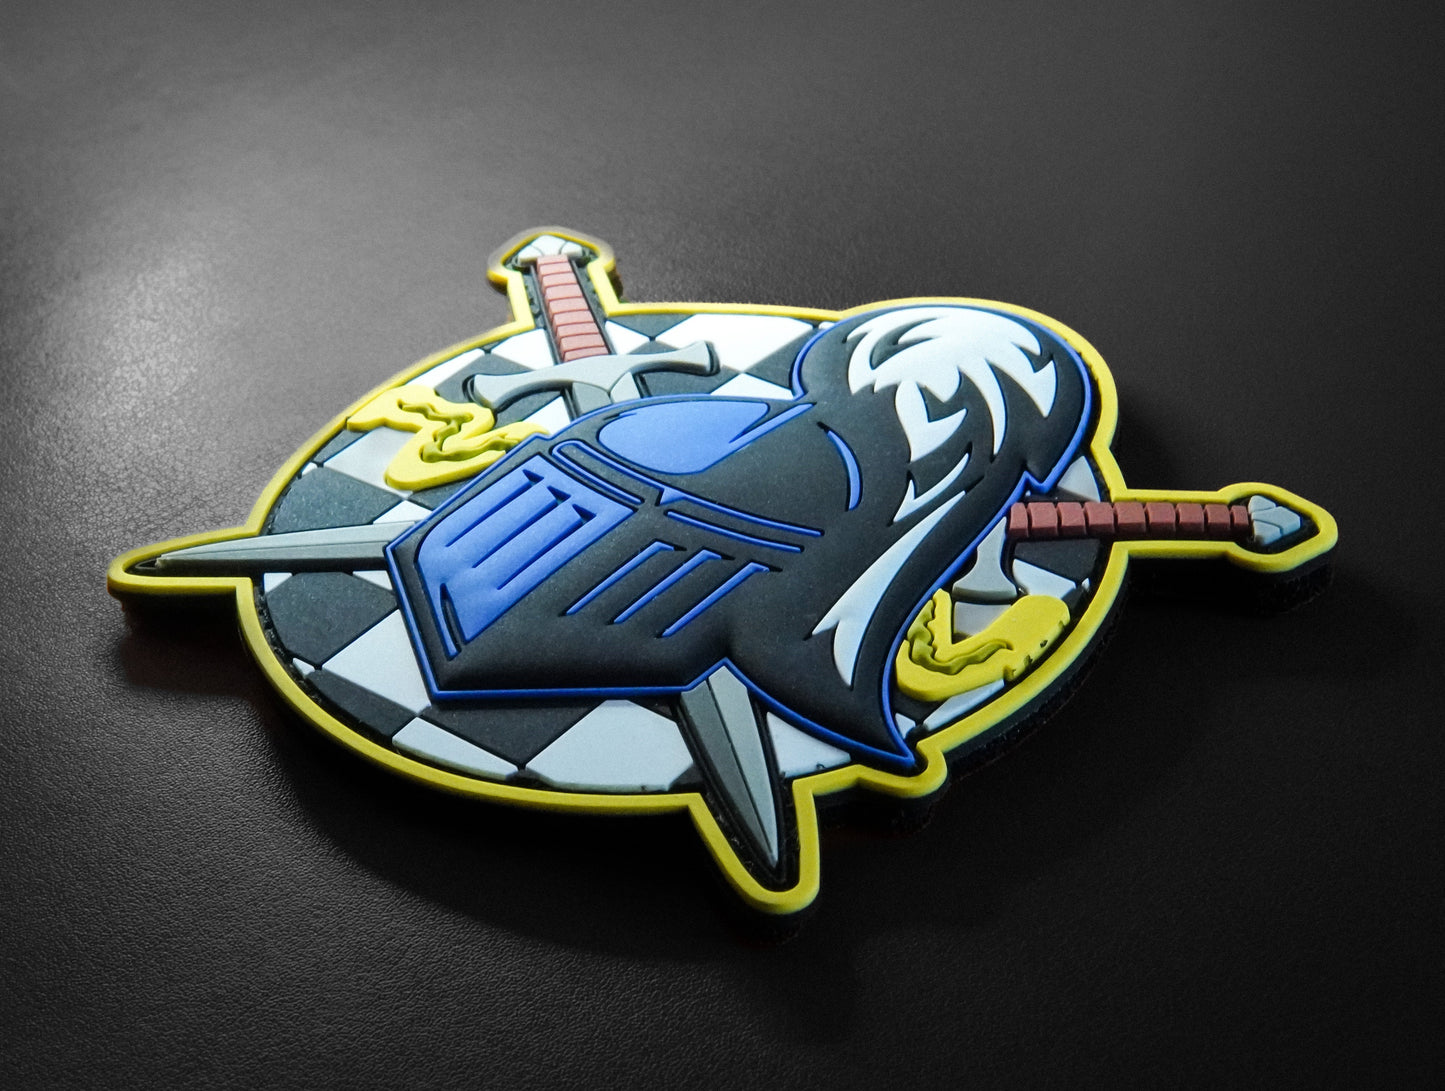 963Rd Aacs Blue Knight Friday Patch